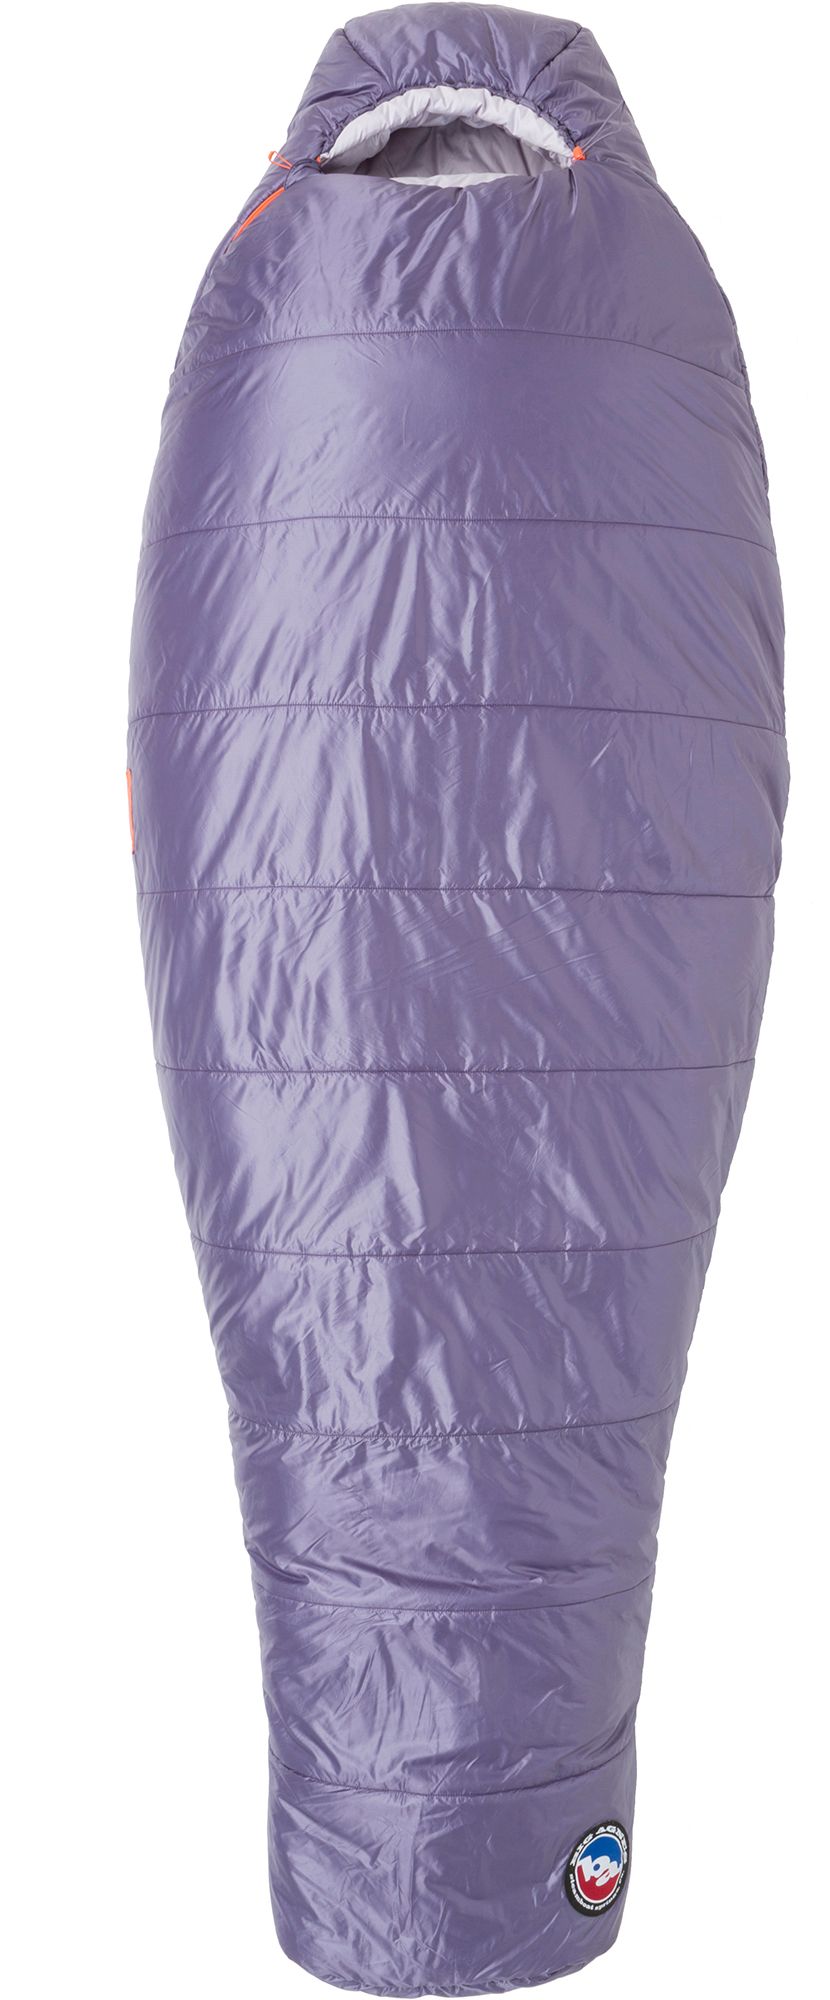 Photos - Suitcase / Backpack Cover Big Agnes Women's Anthracite 20 Sleeping Bag, Regular, Lavender 23TUMUWNTH 